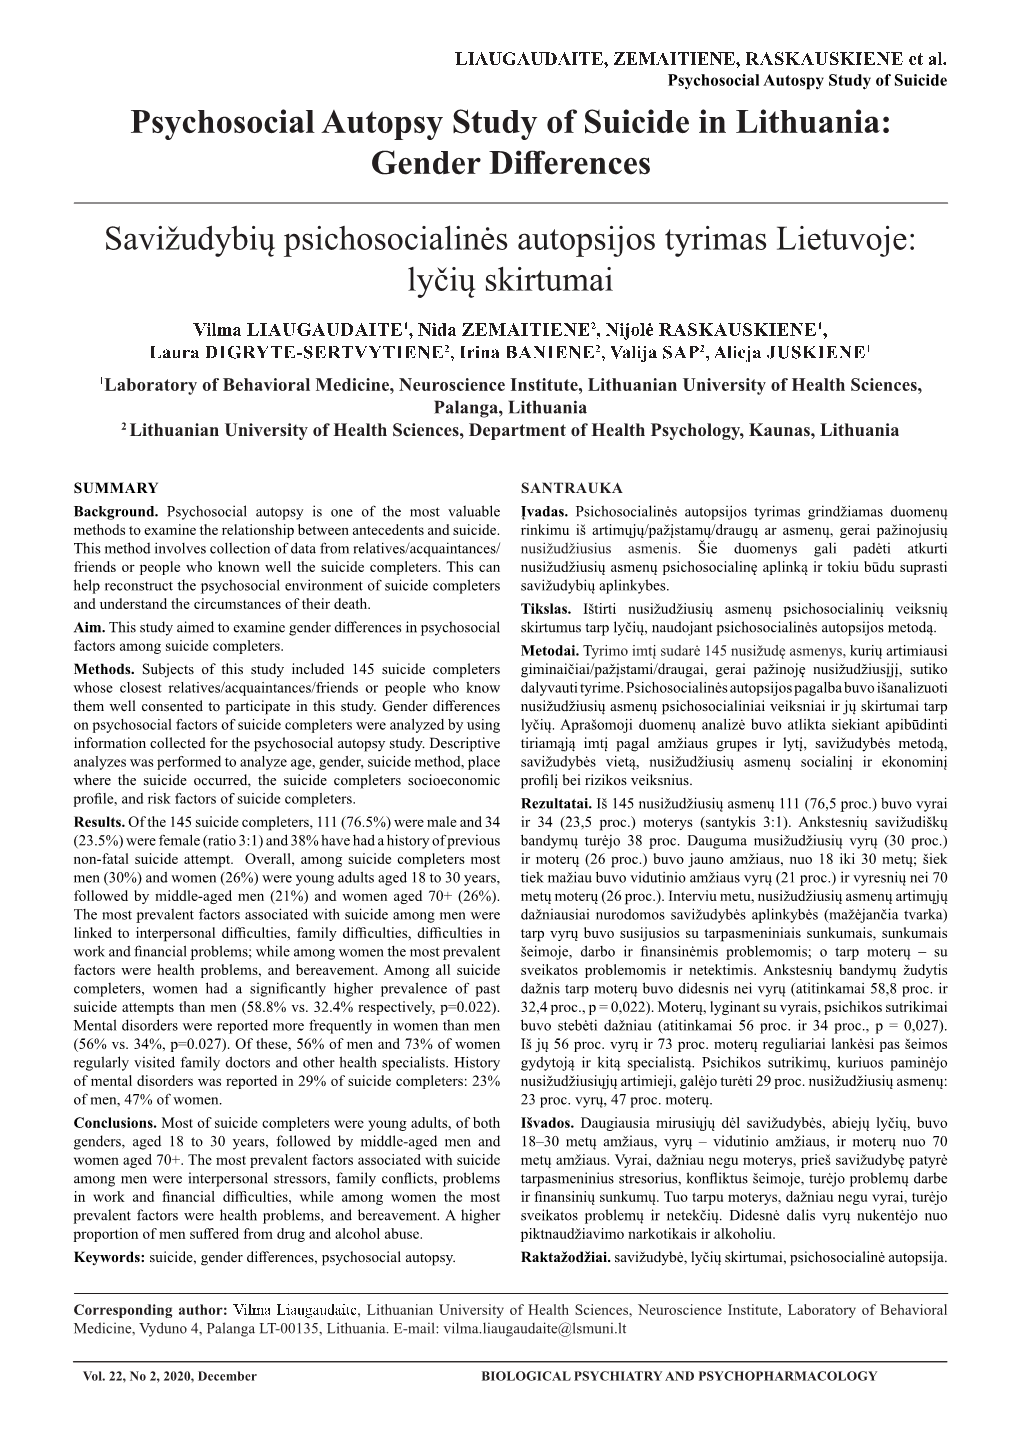 Psychosocial Autopsy Study of Suicide in Lithuania: Gender Differences